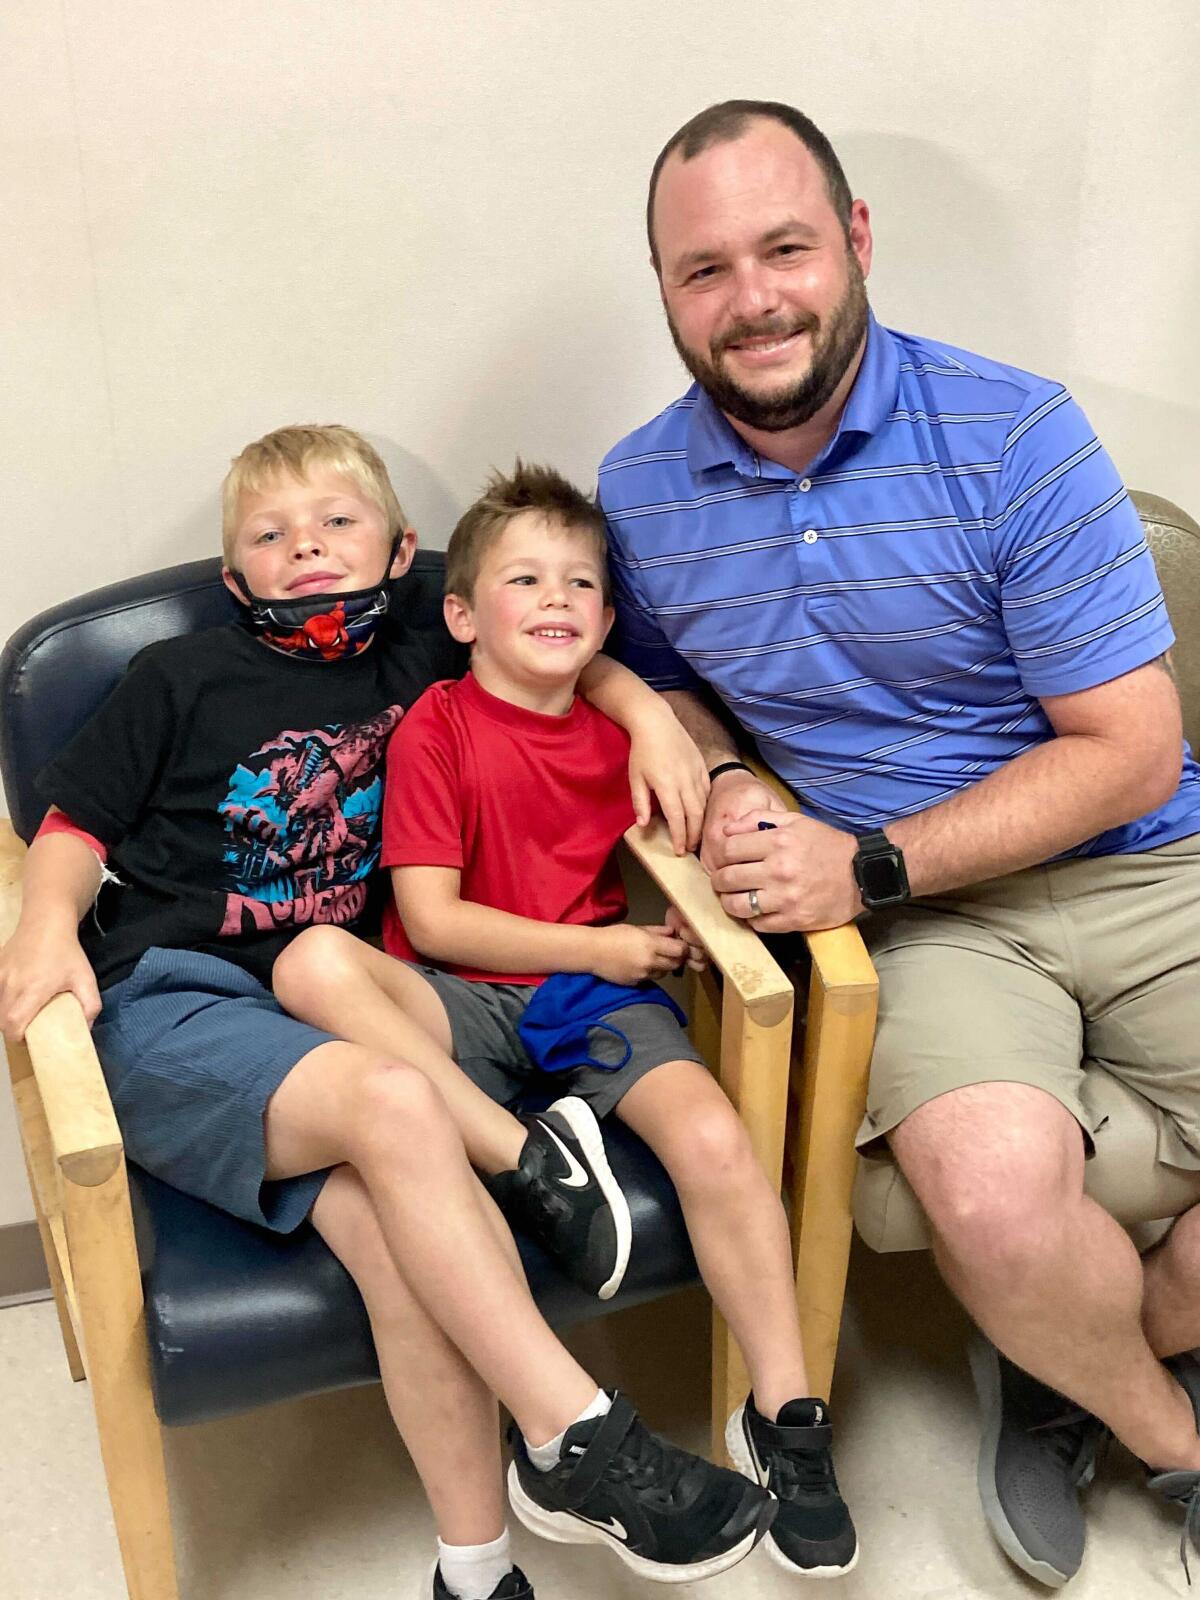 From left, 7-year-old Russell Bright, 5-year-old Tucker Bright, and dad Adam Bright pose for a picture at Ochsner Medical Center in Jefferson, La., Monday, June 7, 2021. Tests of Pfizer’s COVID-19 vaccine started Monday in Louisiana for children ages 5 through 11. (AP Photo/Stacey Plaisance)